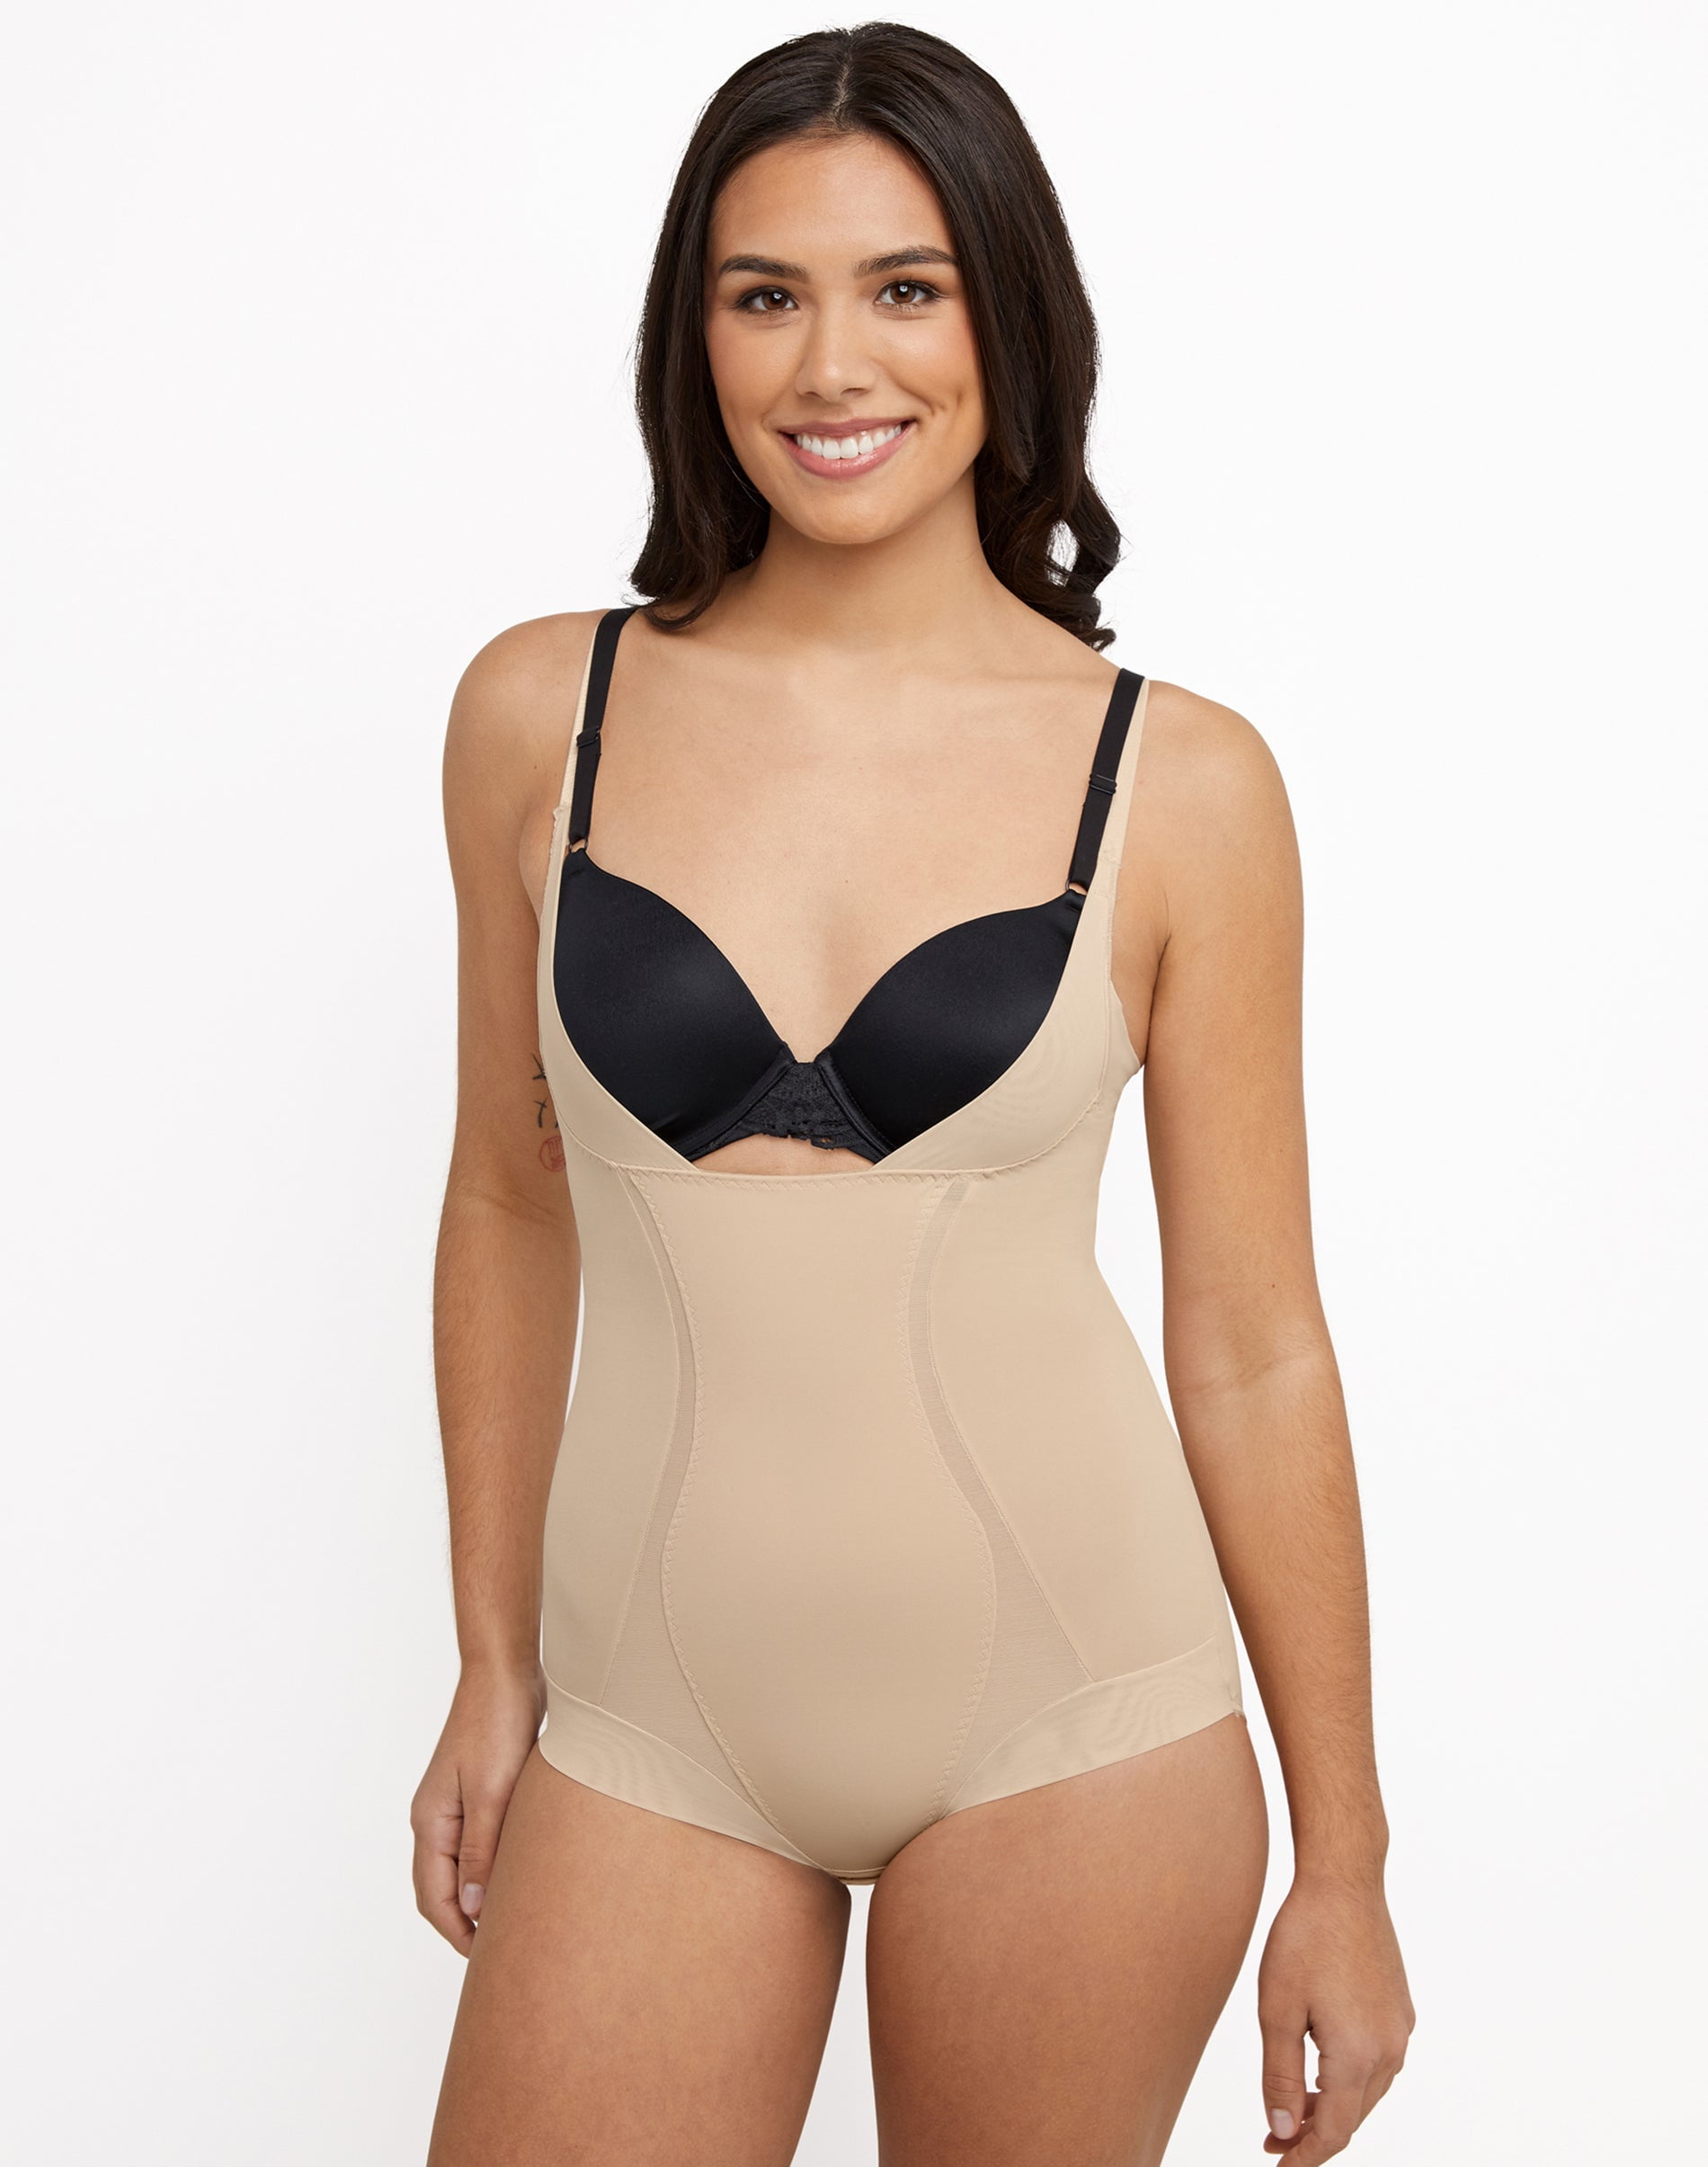 Plusform Instant Shaping Firm Control Bodybriefer